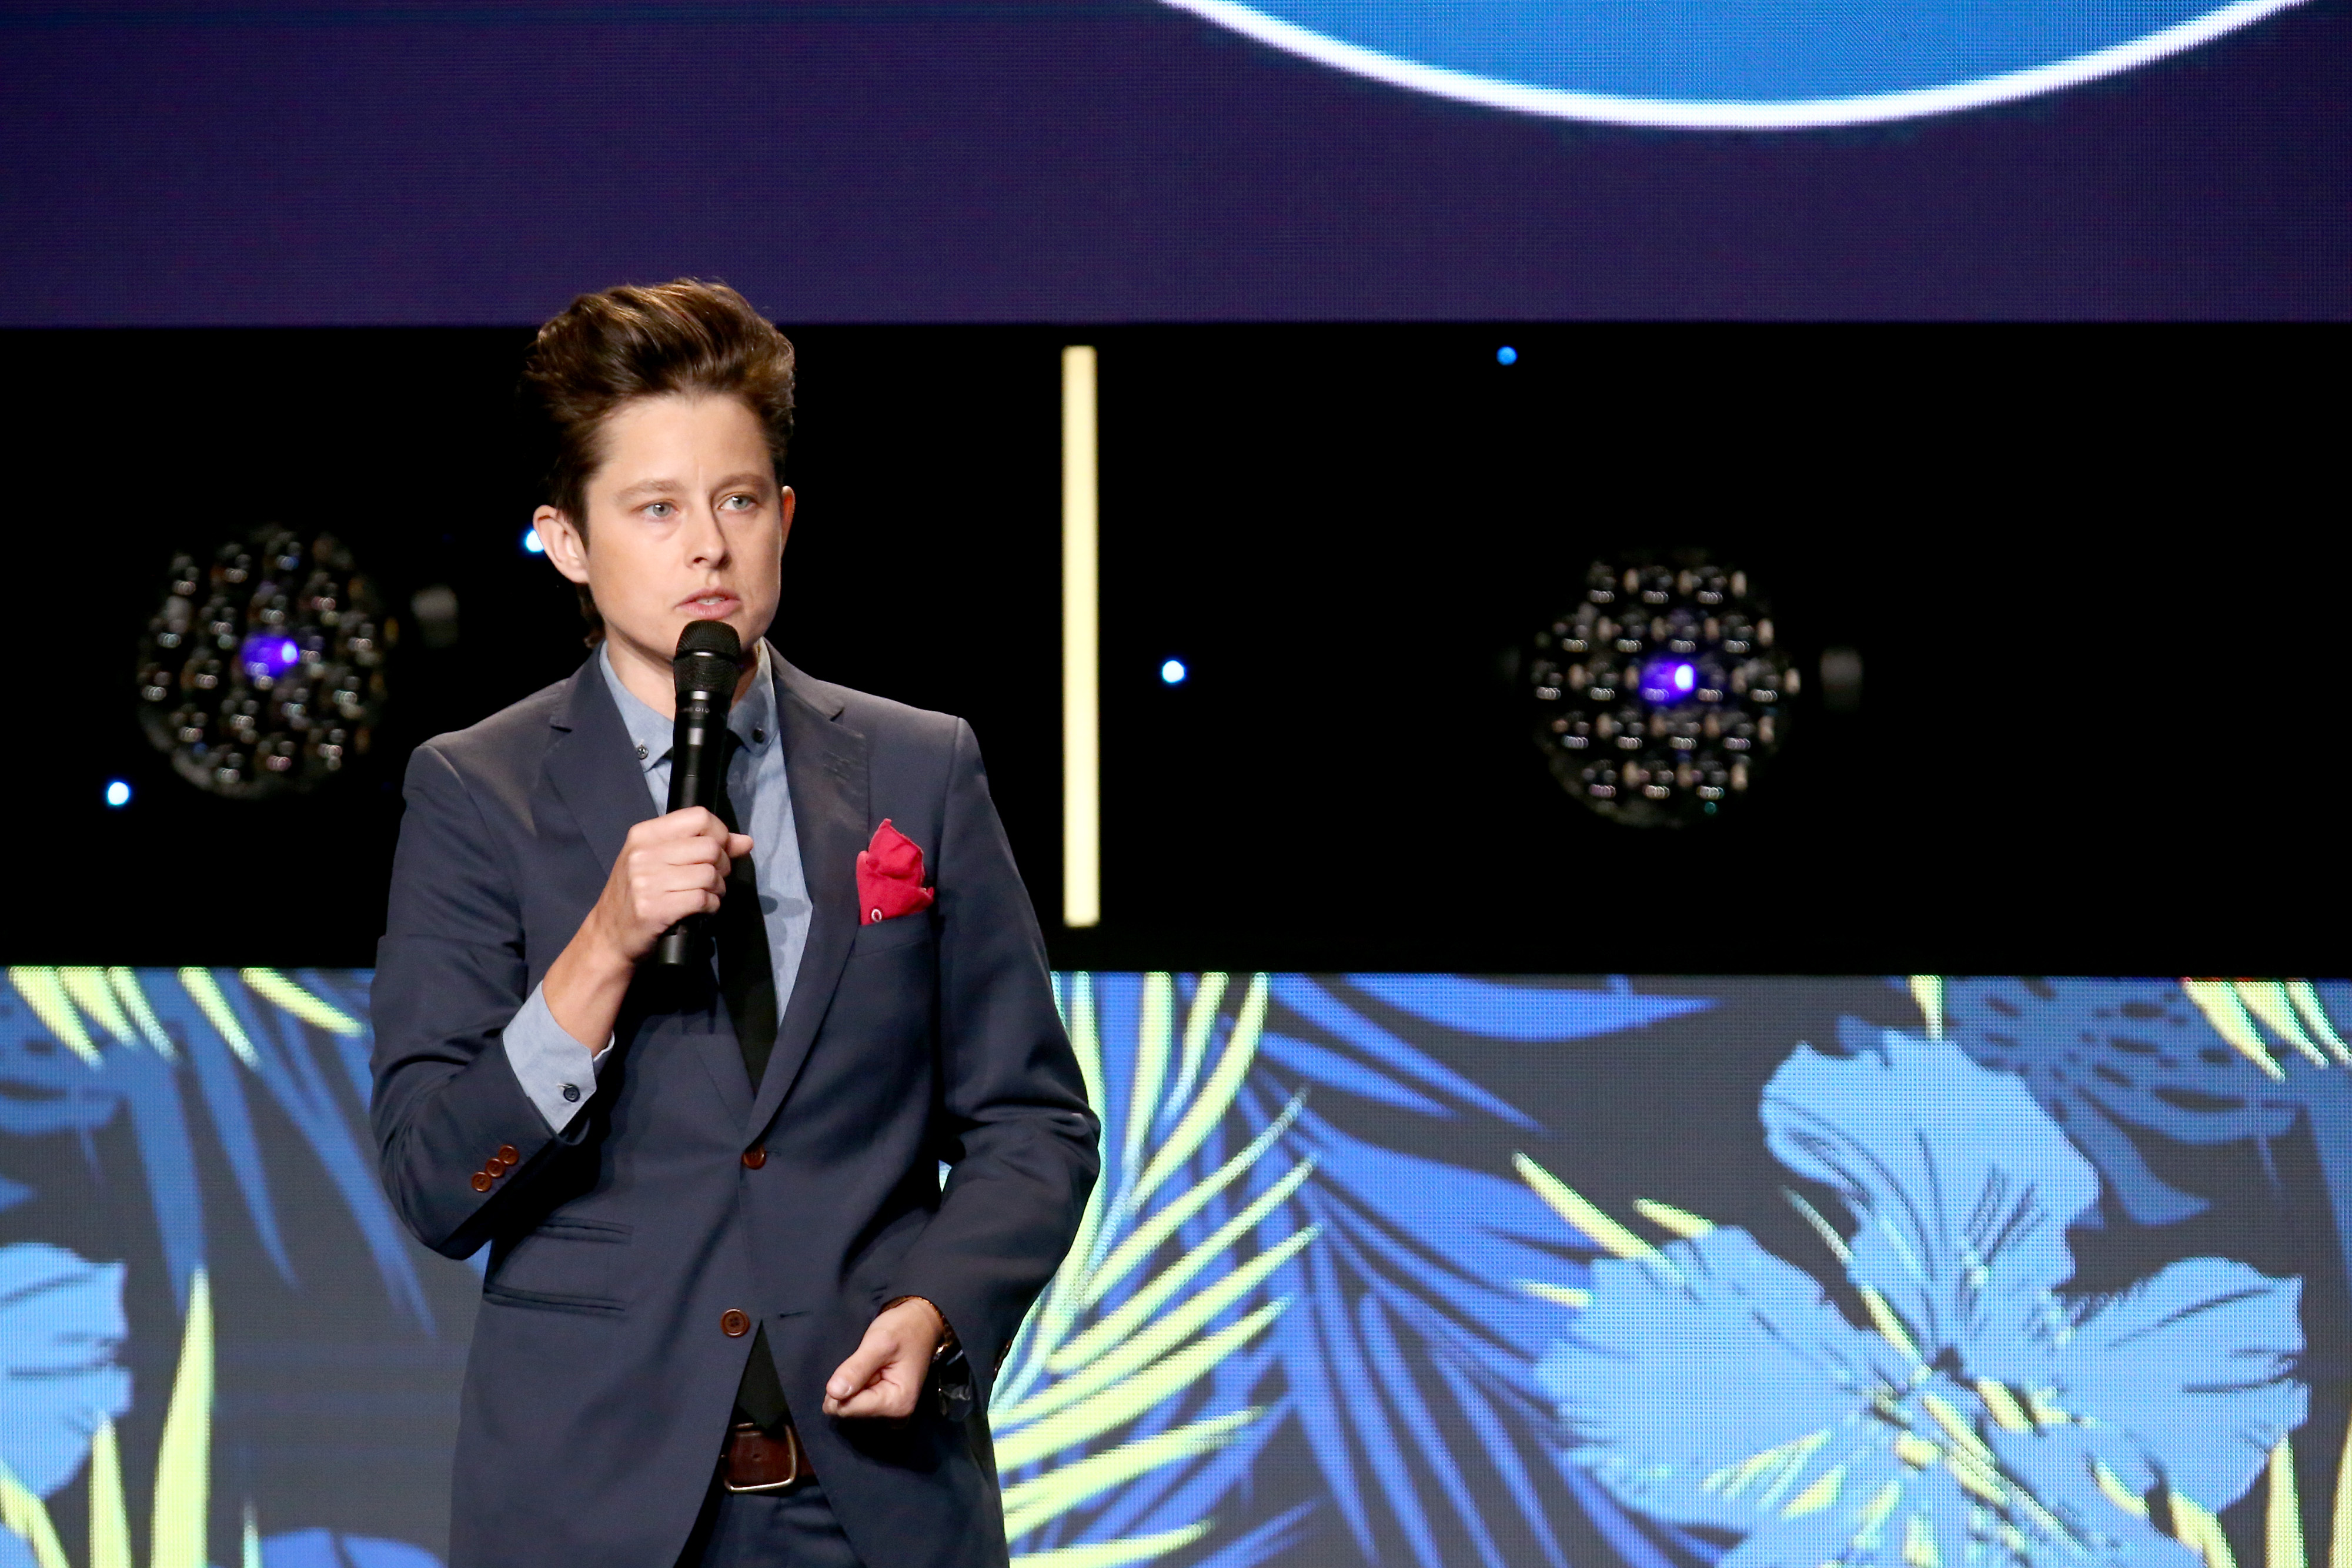 Rhea Butcher stands while holding a microphone